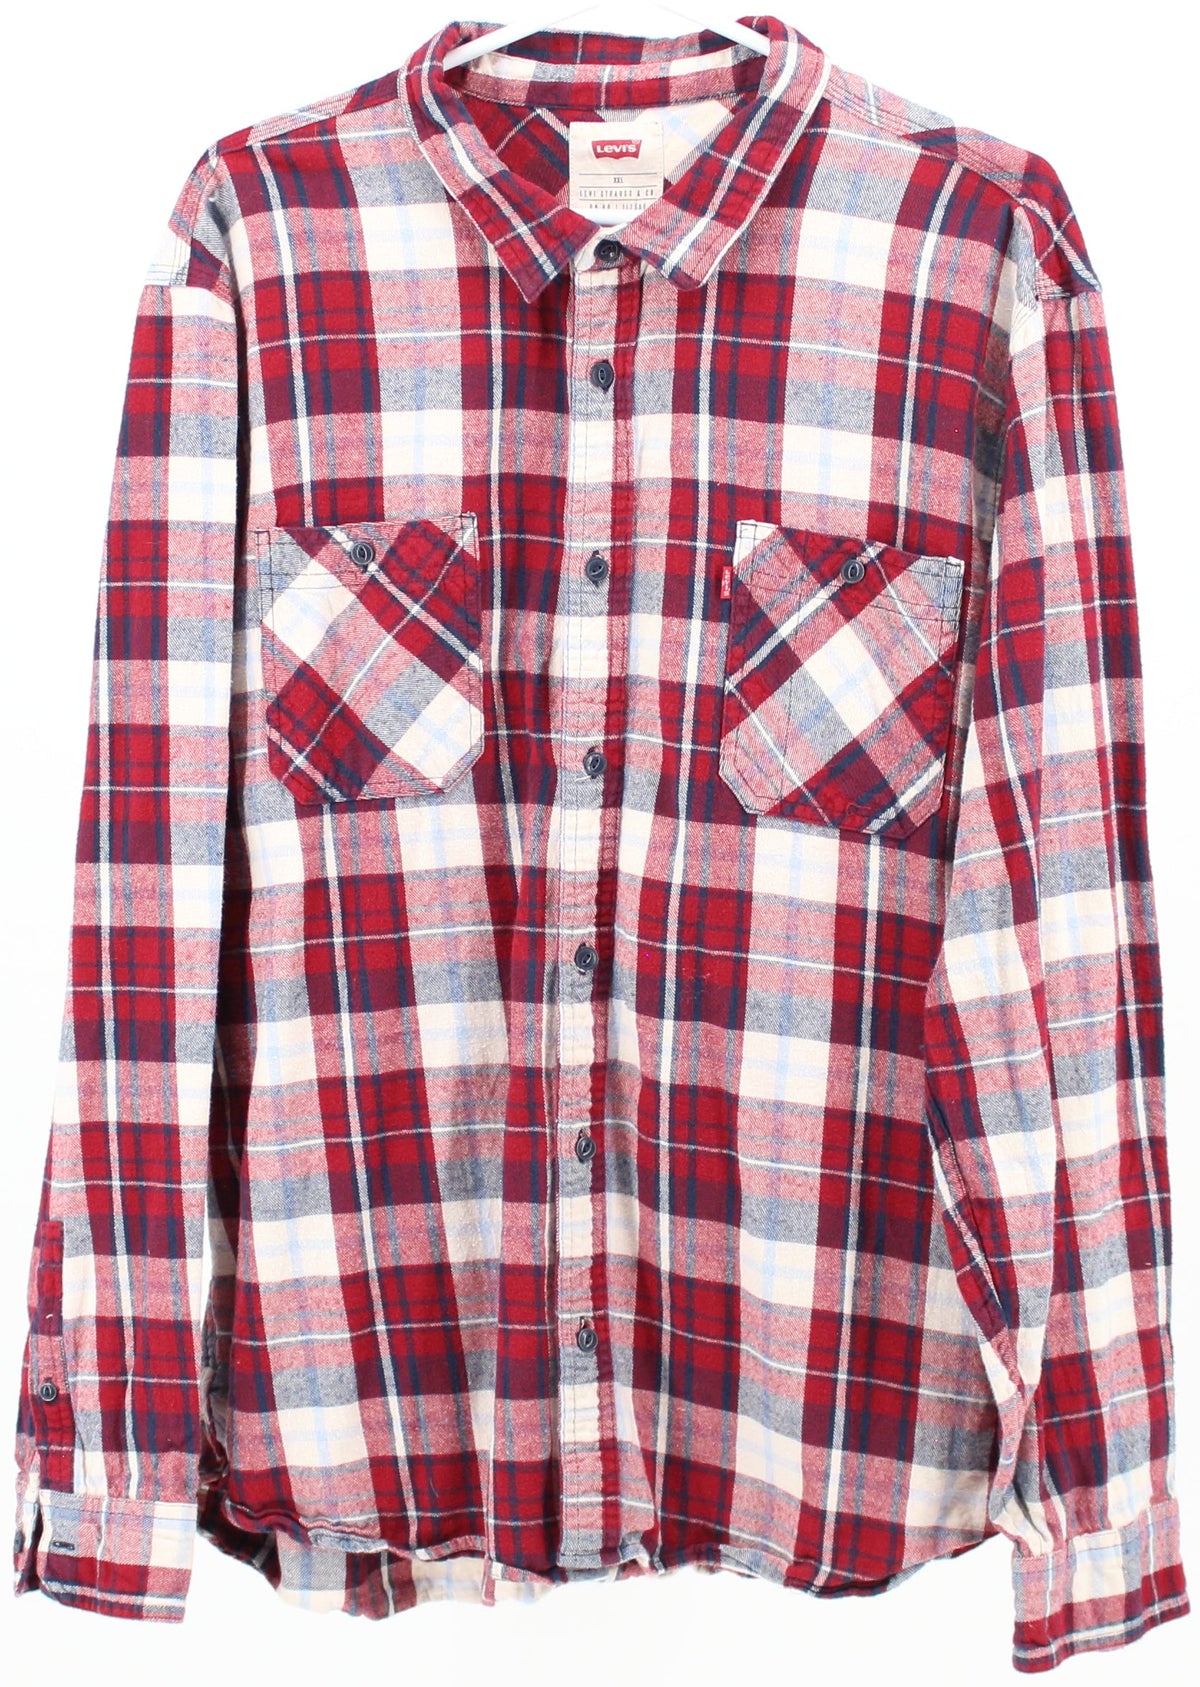 Levis Red Navy Blue and White Plaid Flannel Shirt